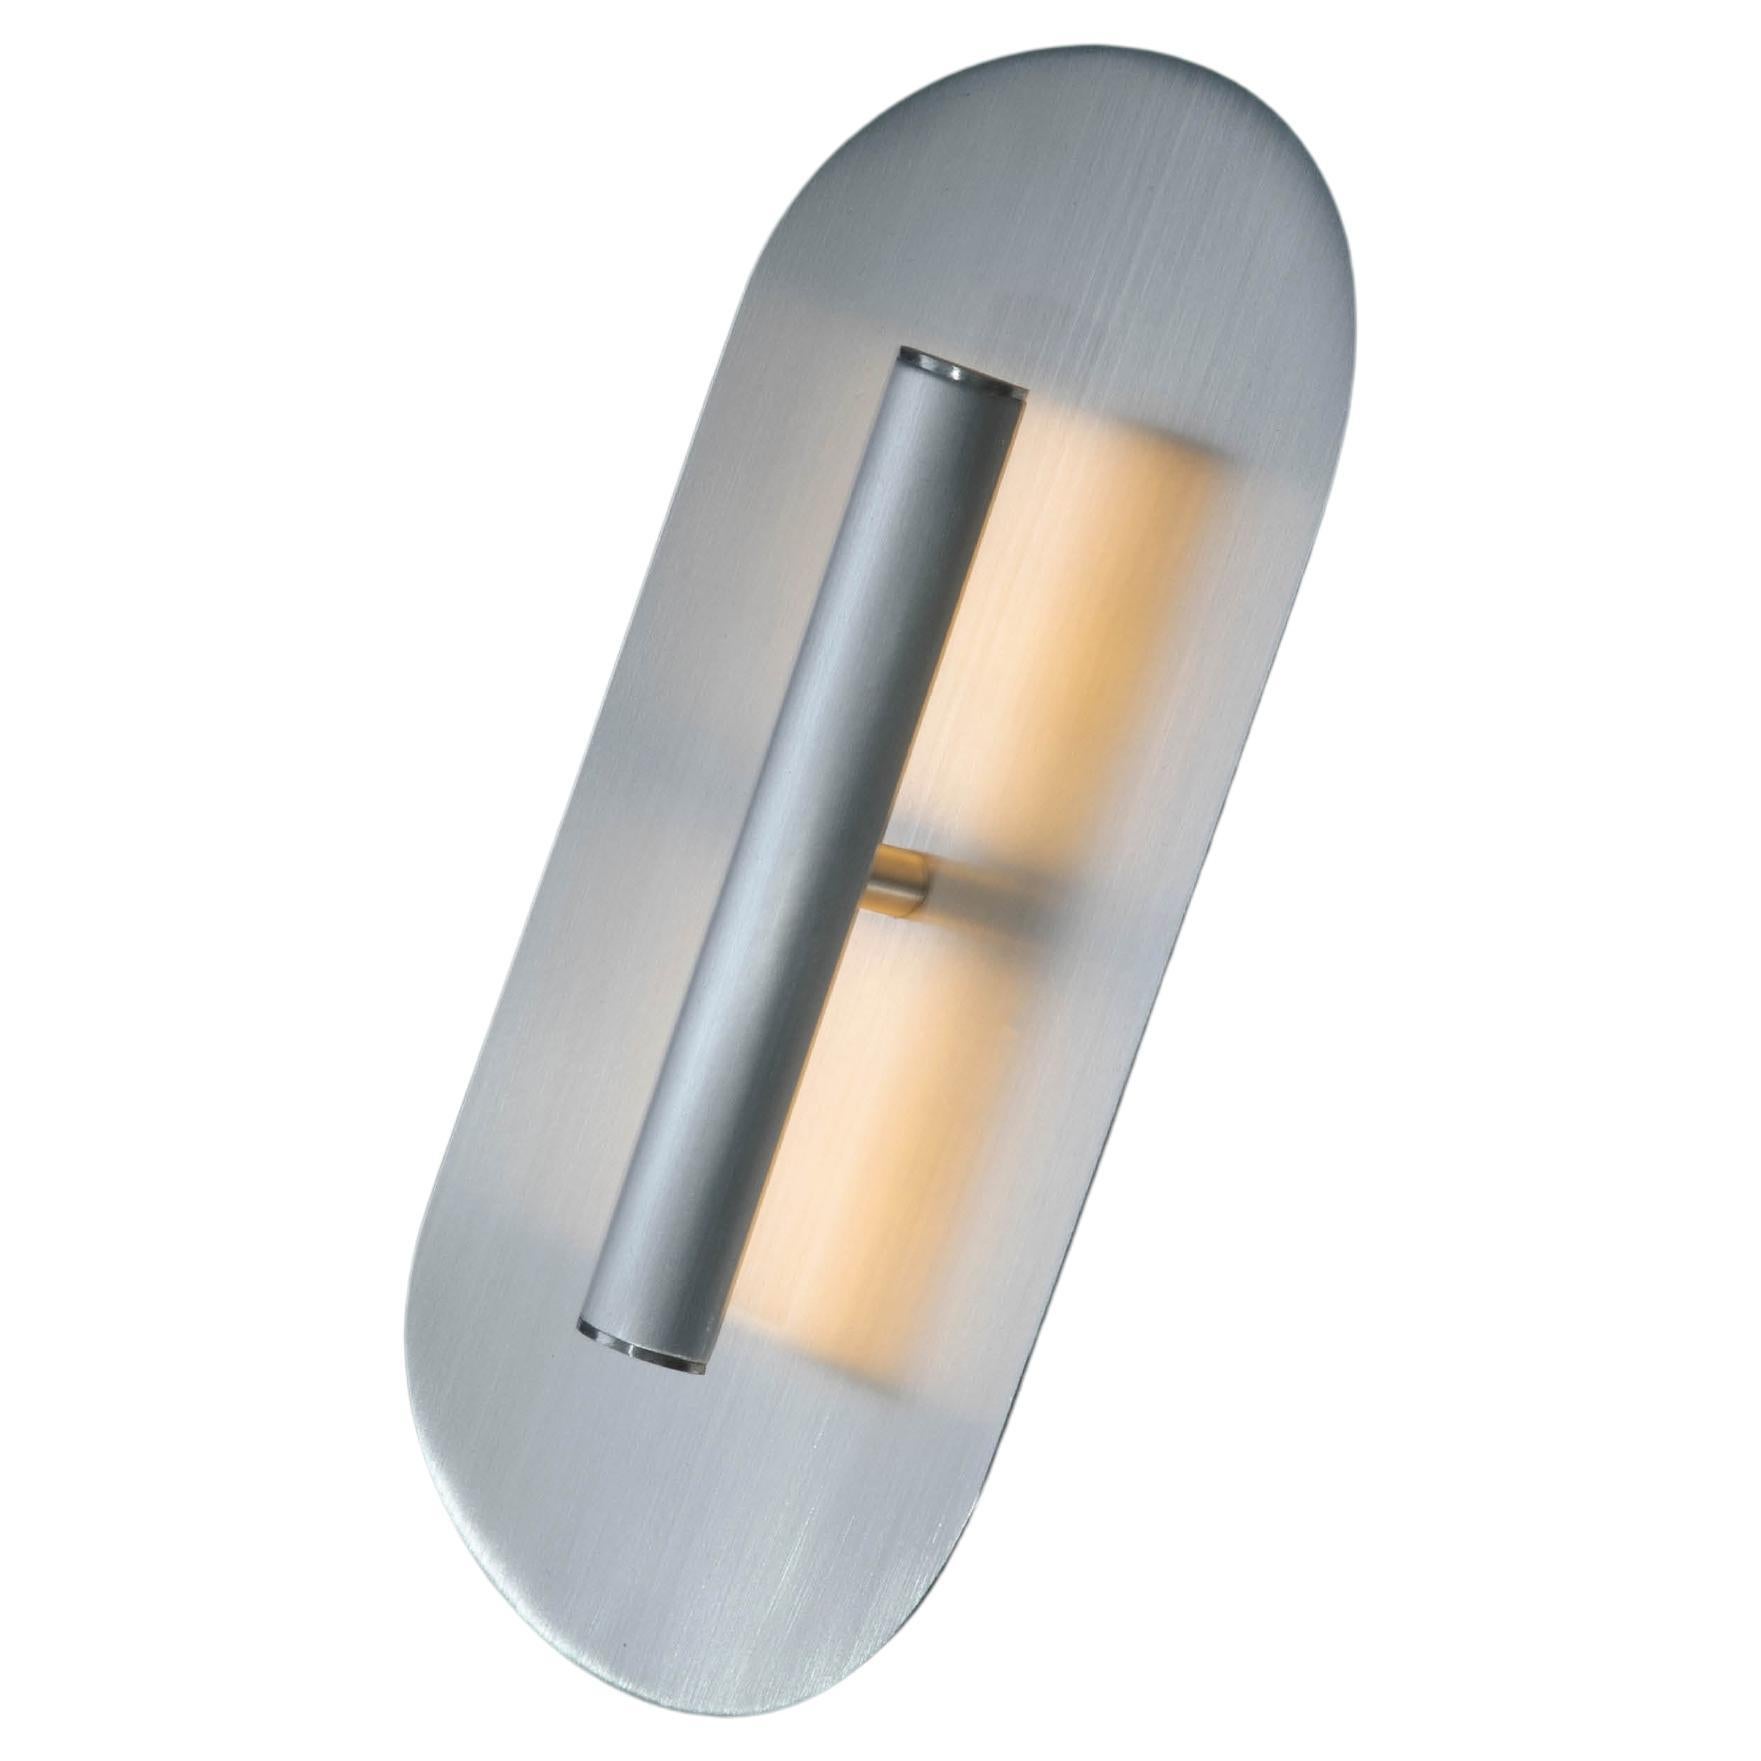 Reflector Wall Sconce 300, LED Light Fixture, Raw Brushed Aluminum Metal For Sale